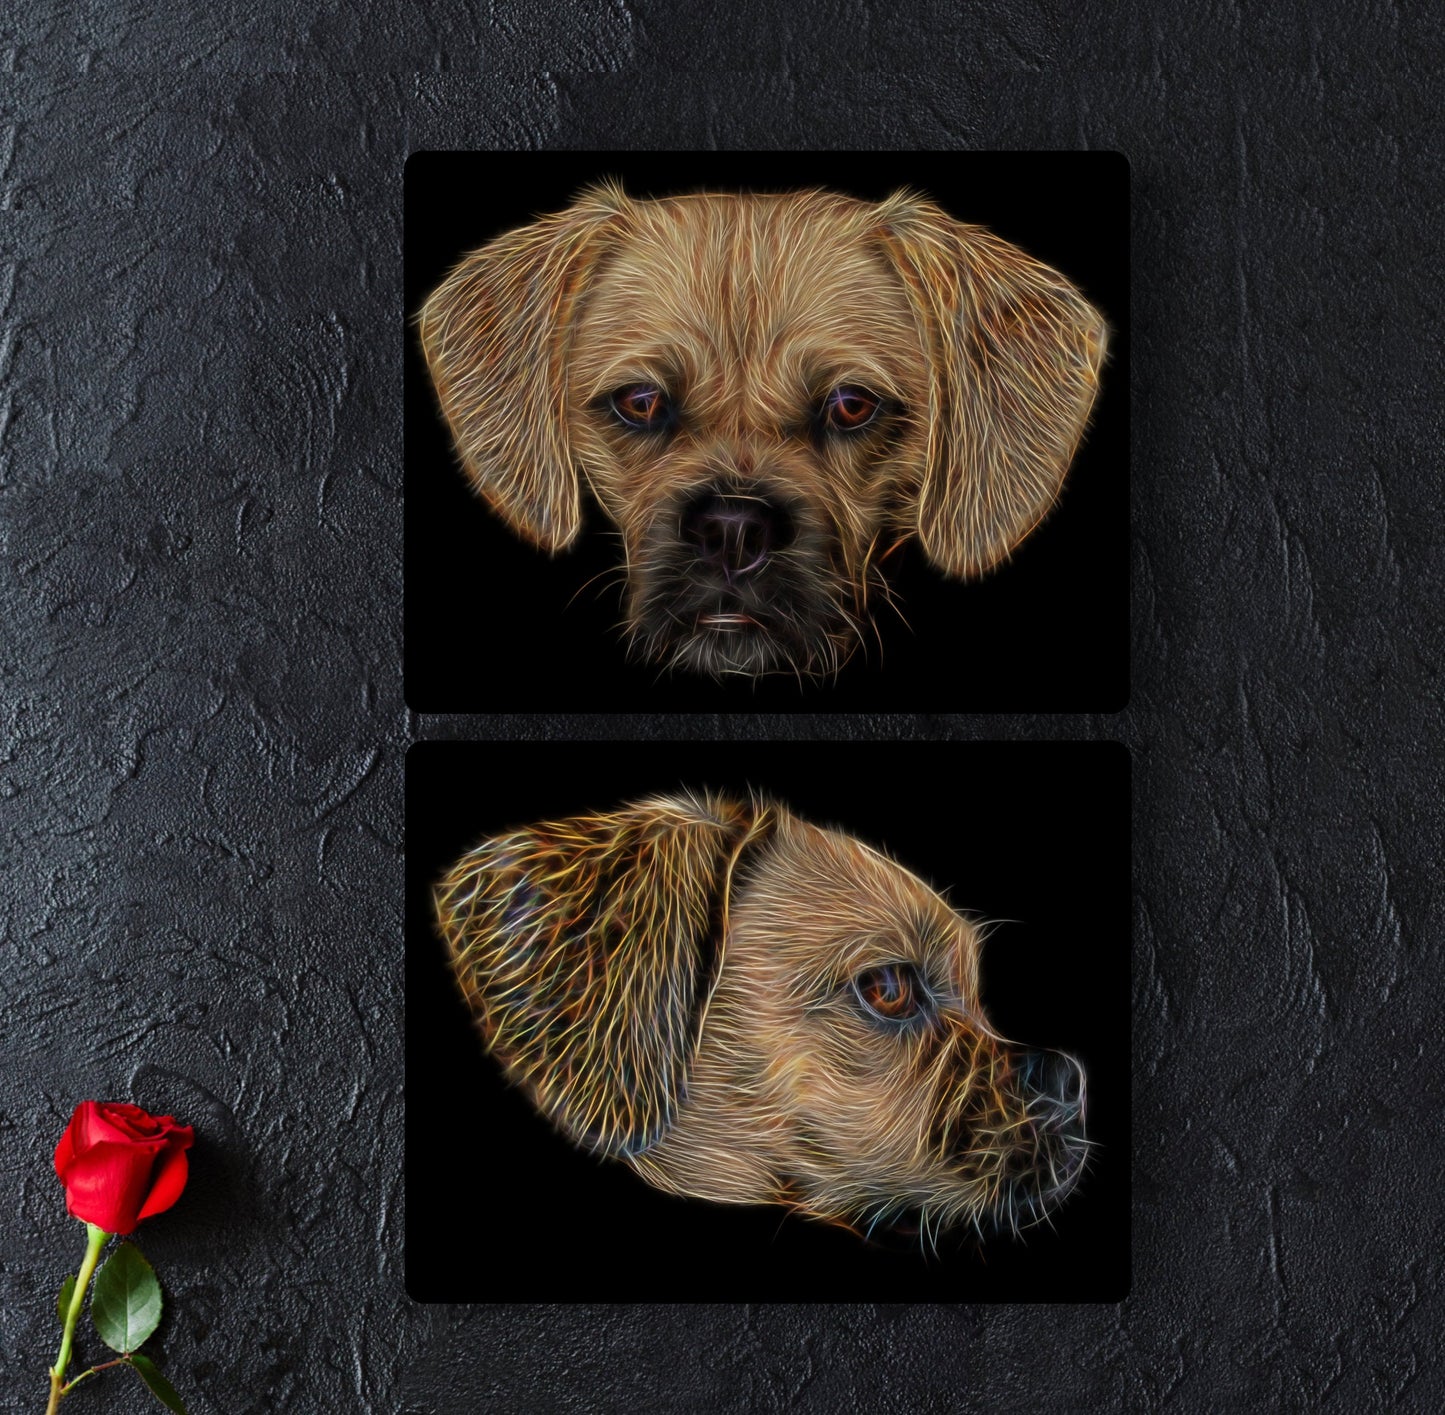 Puggle Aluminium Metal Wall Plaque with Fractal Art Design, Gift for Puggle Owner